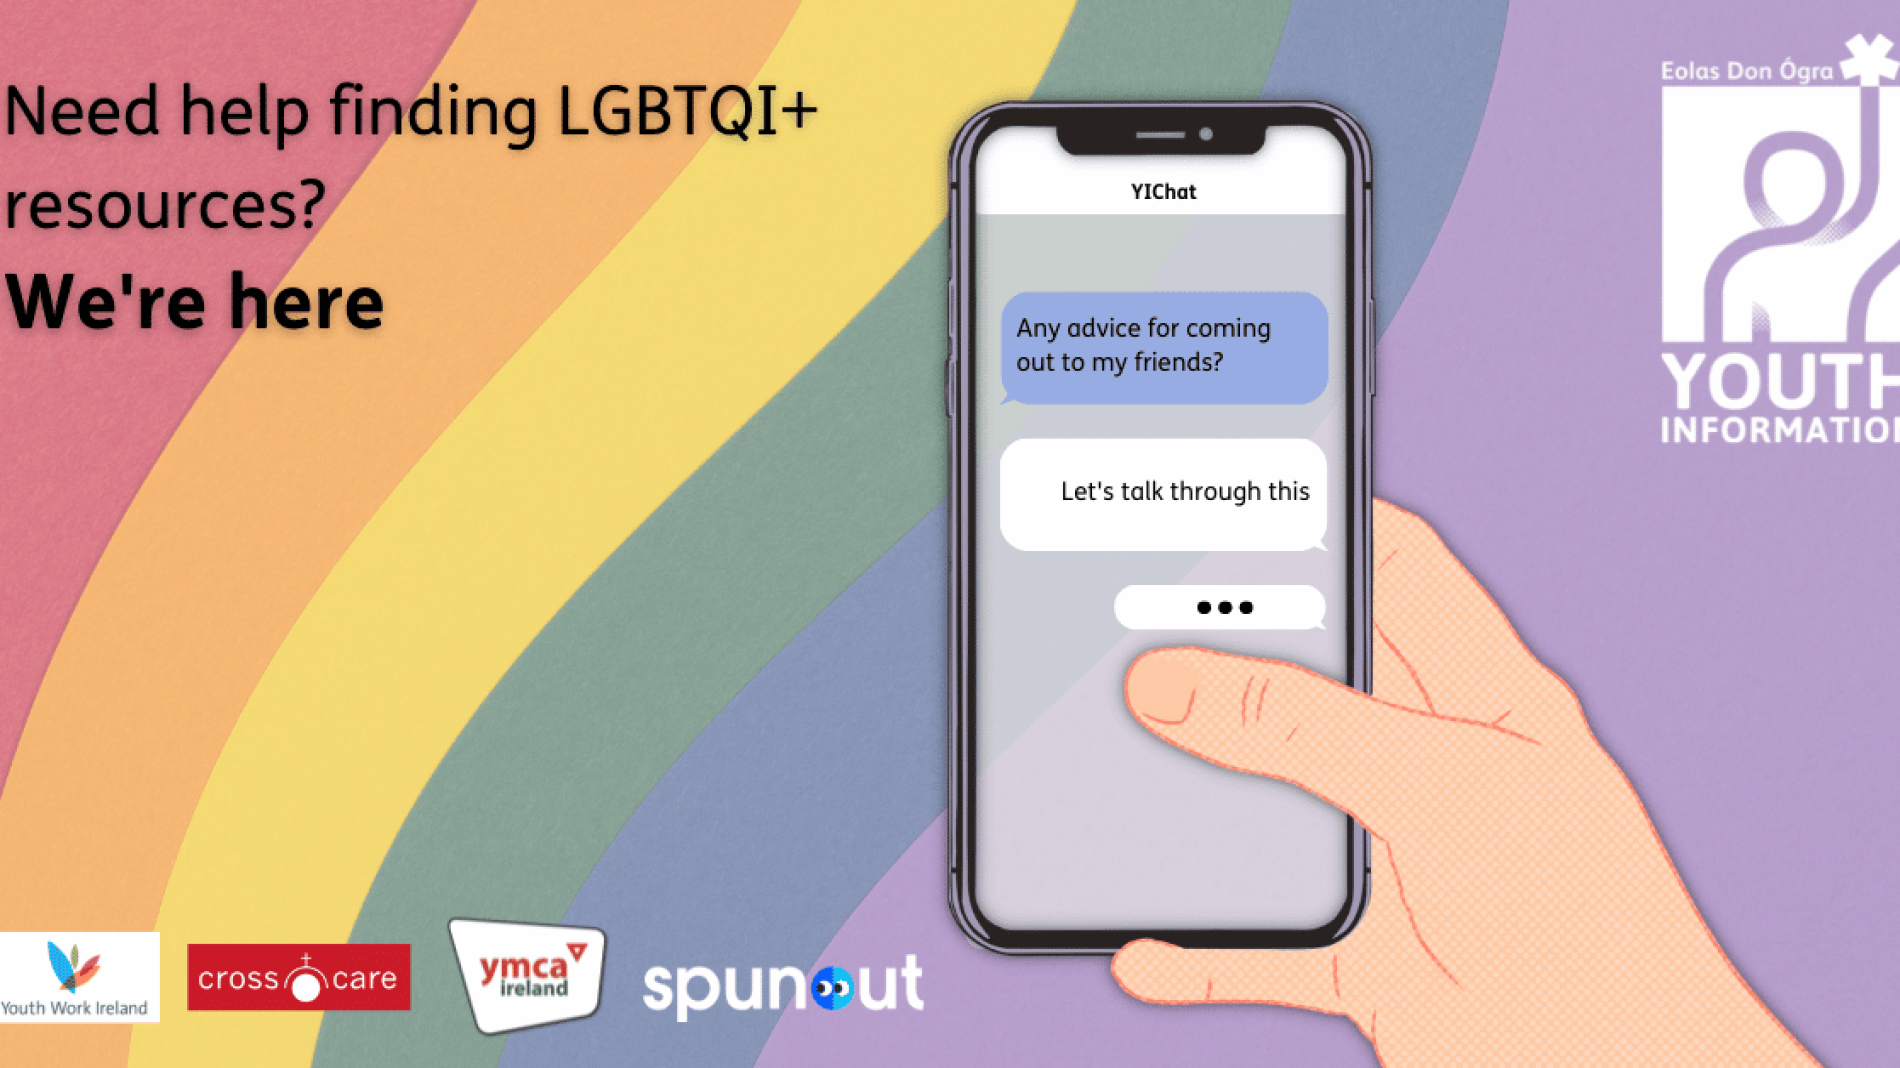 Graphic with rainbow coloured background and a mobile phone with a text conversation and logos for Youth Work Ireland, YMCA, Crosscare and spunout